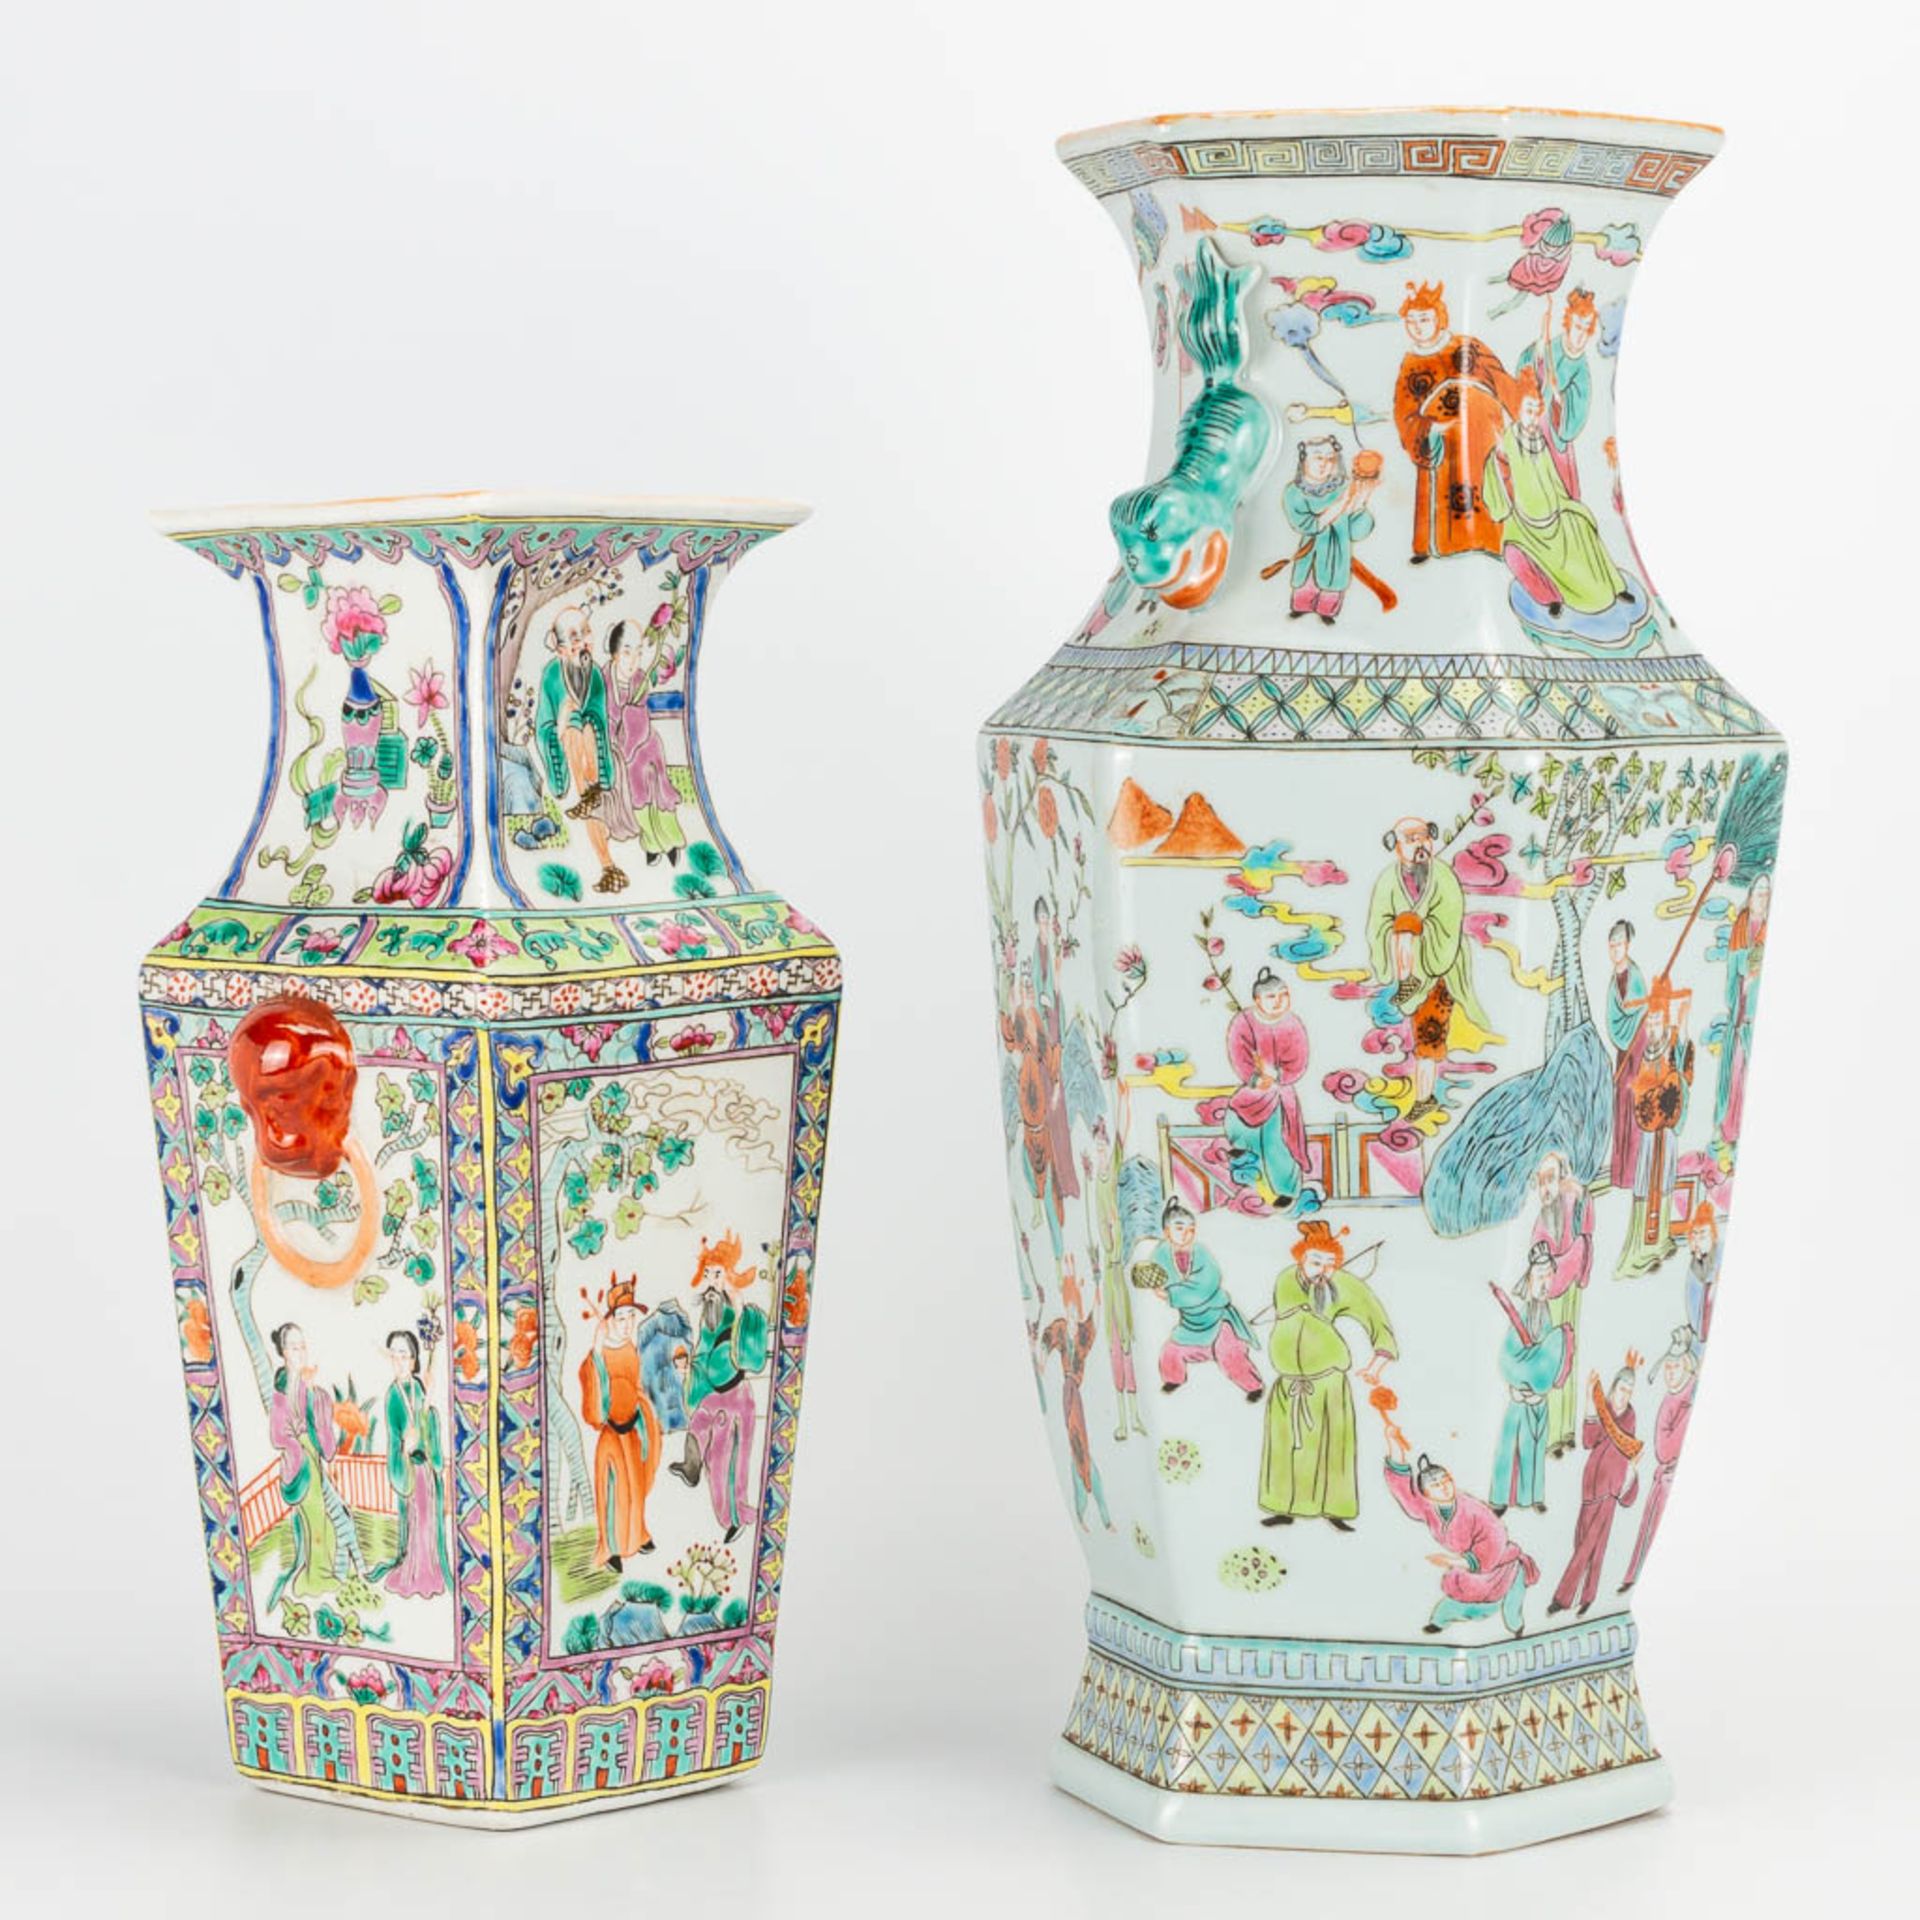 A collection of 2 Chinese vases with decor of emperors, playing children and ladies in court. 20th c - Image 13 of 29